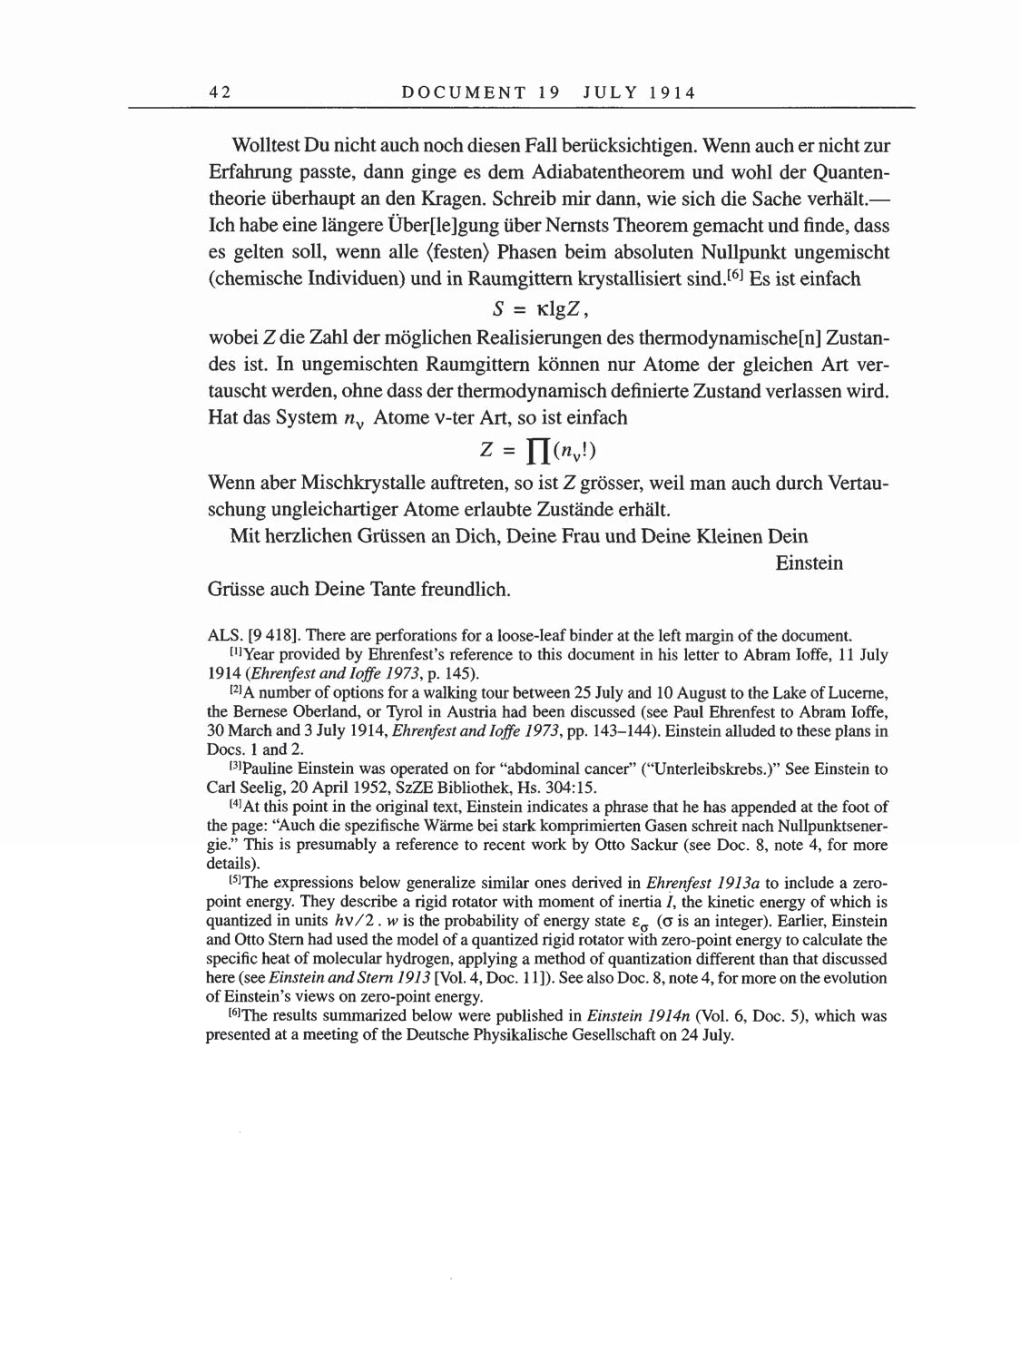 Volume 8, Part A: The Berlin Years: Correspondence 1914-1917 page 42